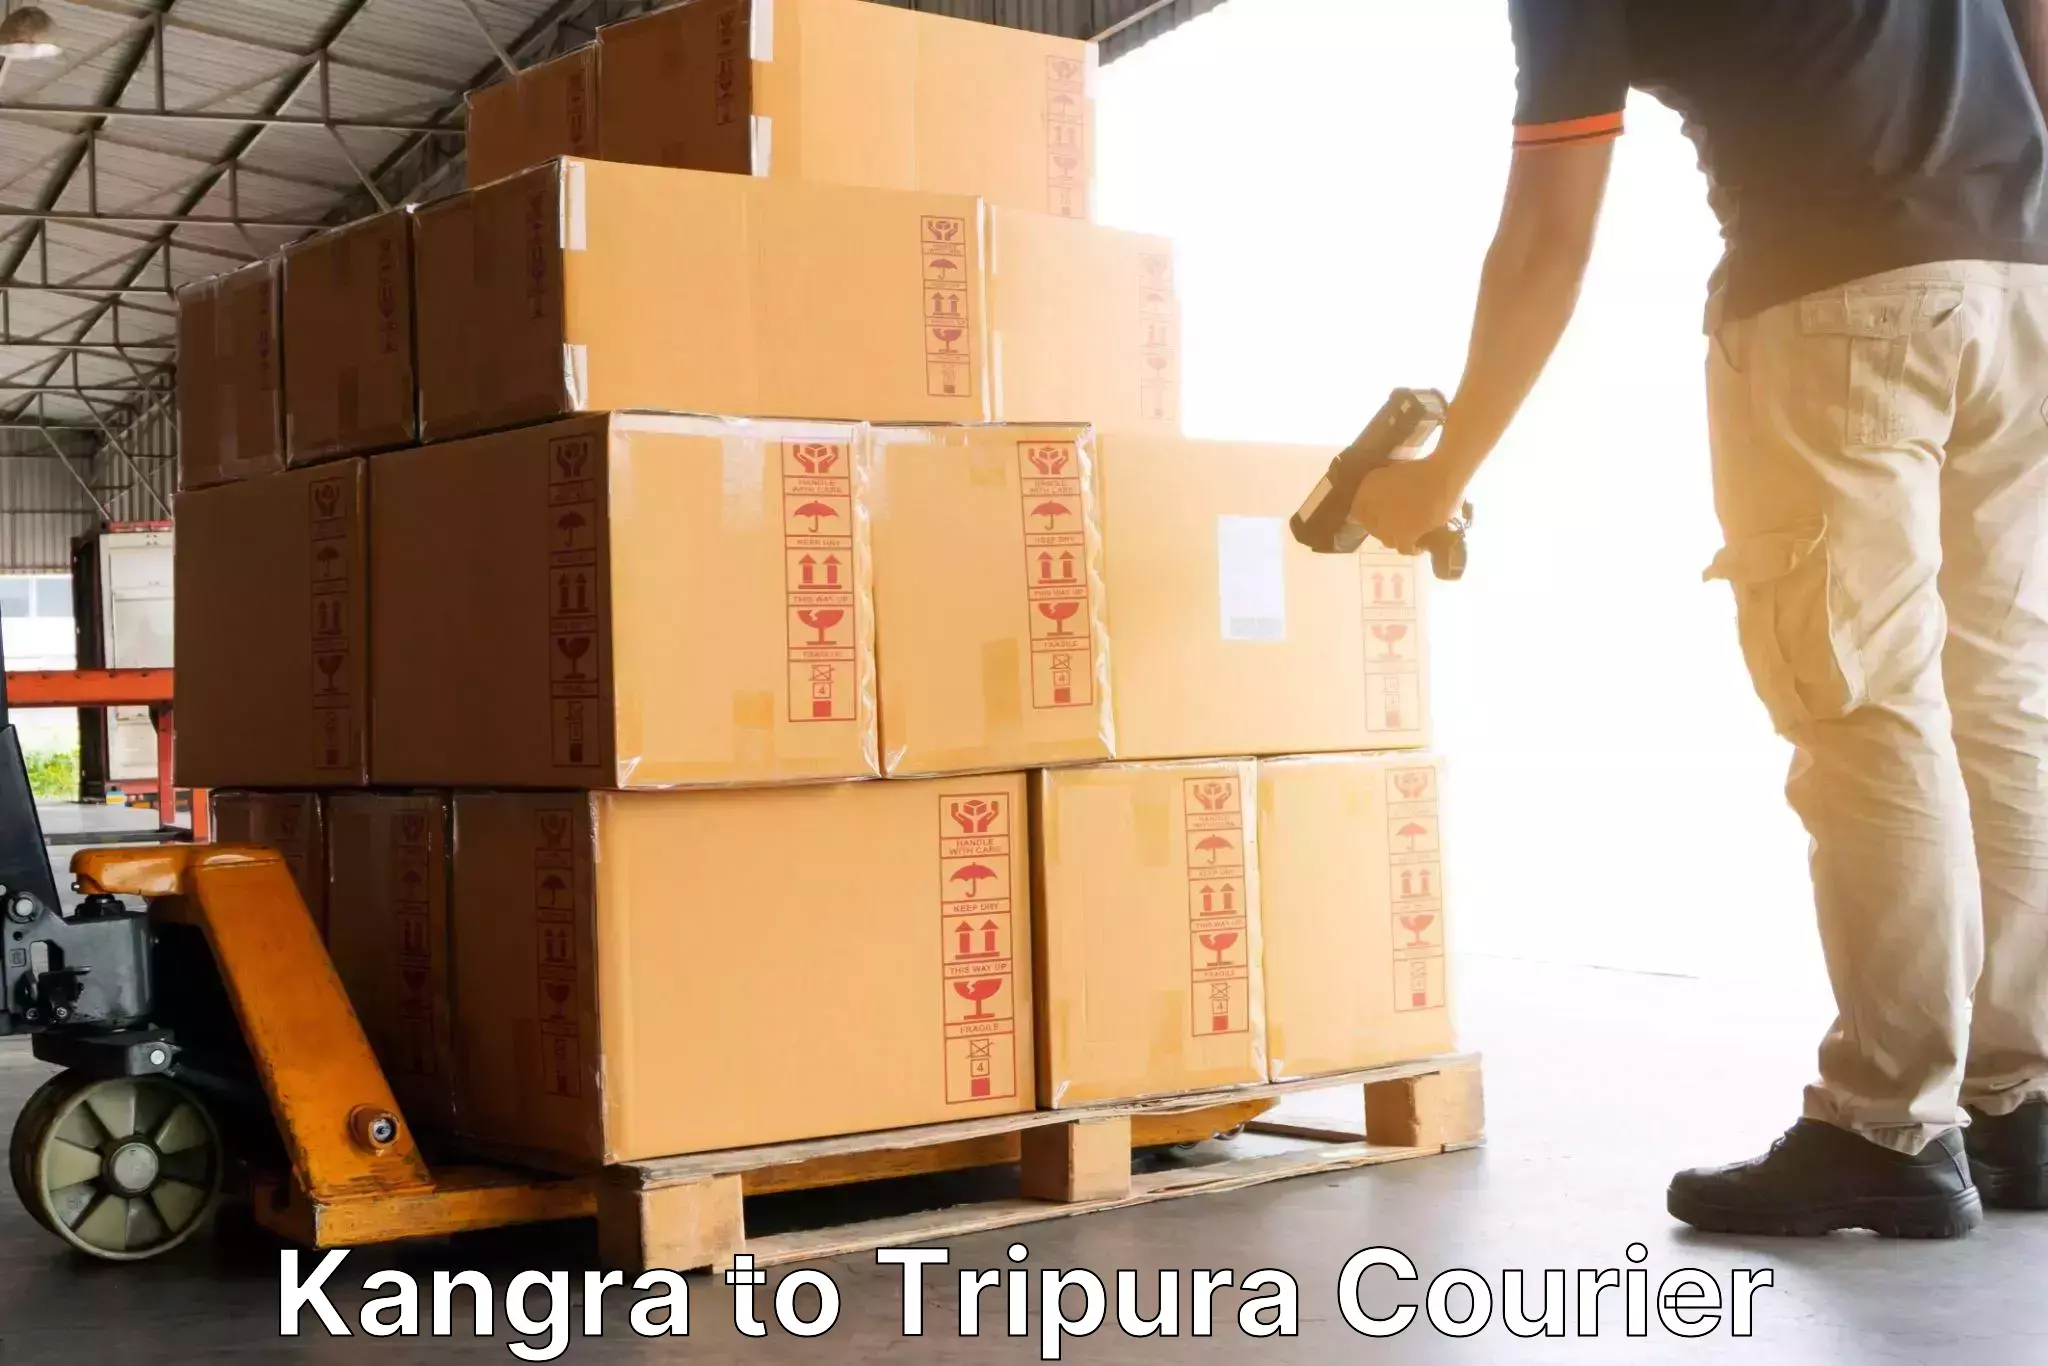 Express package delivery in Kangra to Udaipur Tripura